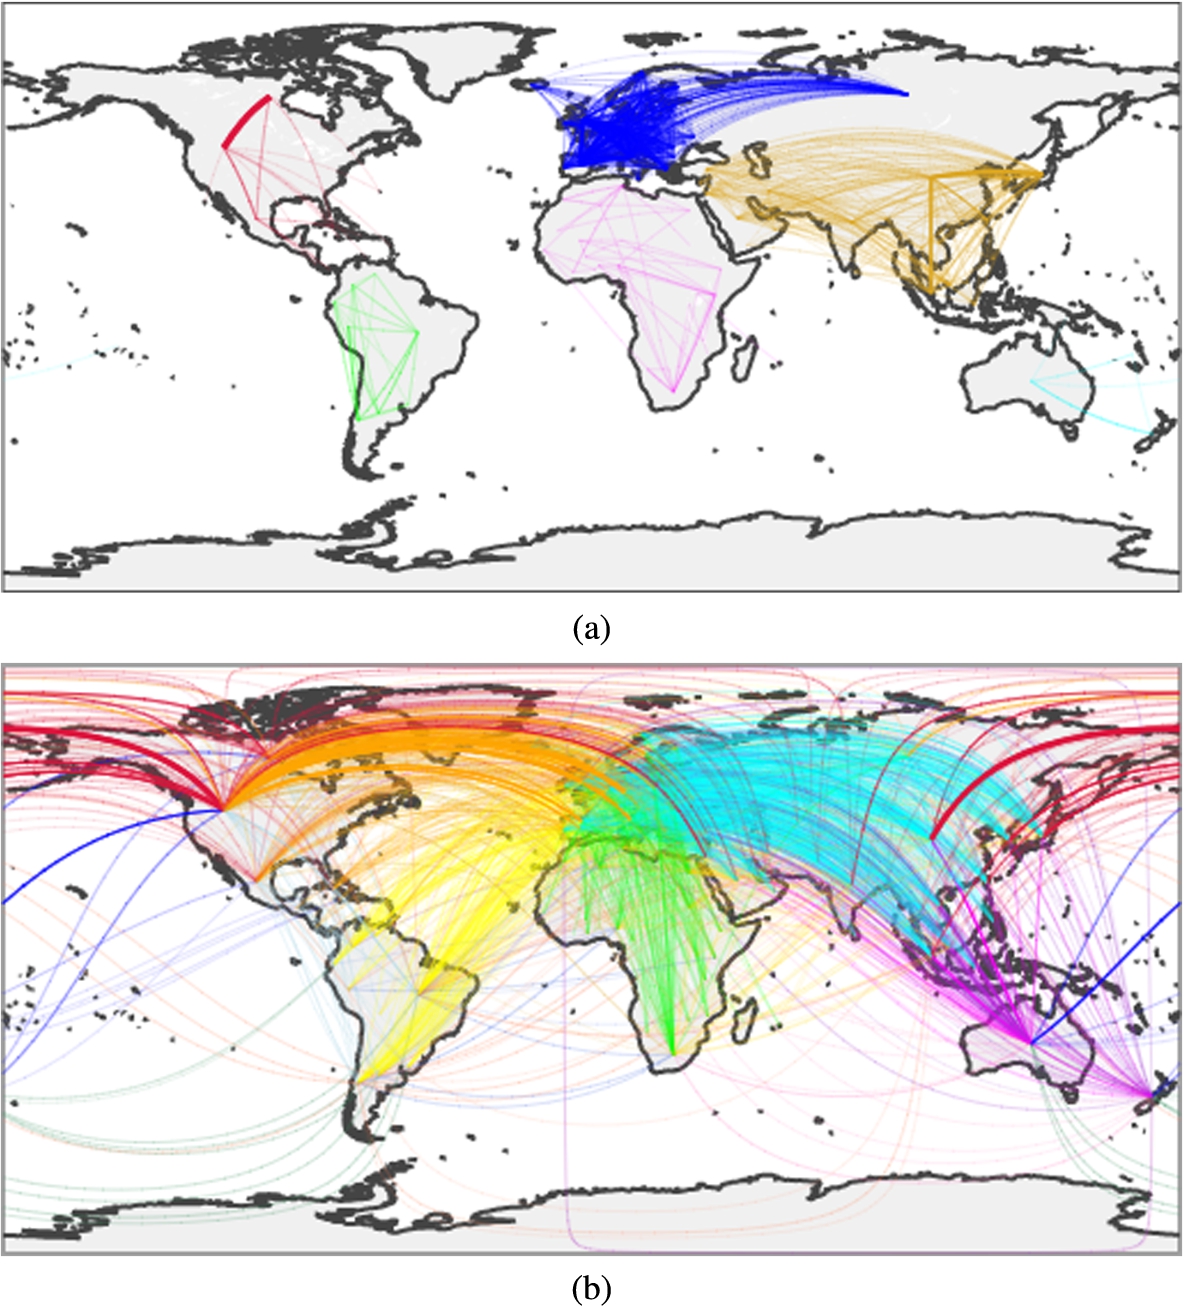 Intracontinental (a) and intercontinental (b) collaborations among countries. Edges represent a collaboration among two countries within a paper; the width of the edge represents the intensity of the collaboration, while the colour encodes the couple of continents involved. As the images are information rich, we suggest exploring them on the online notebook.